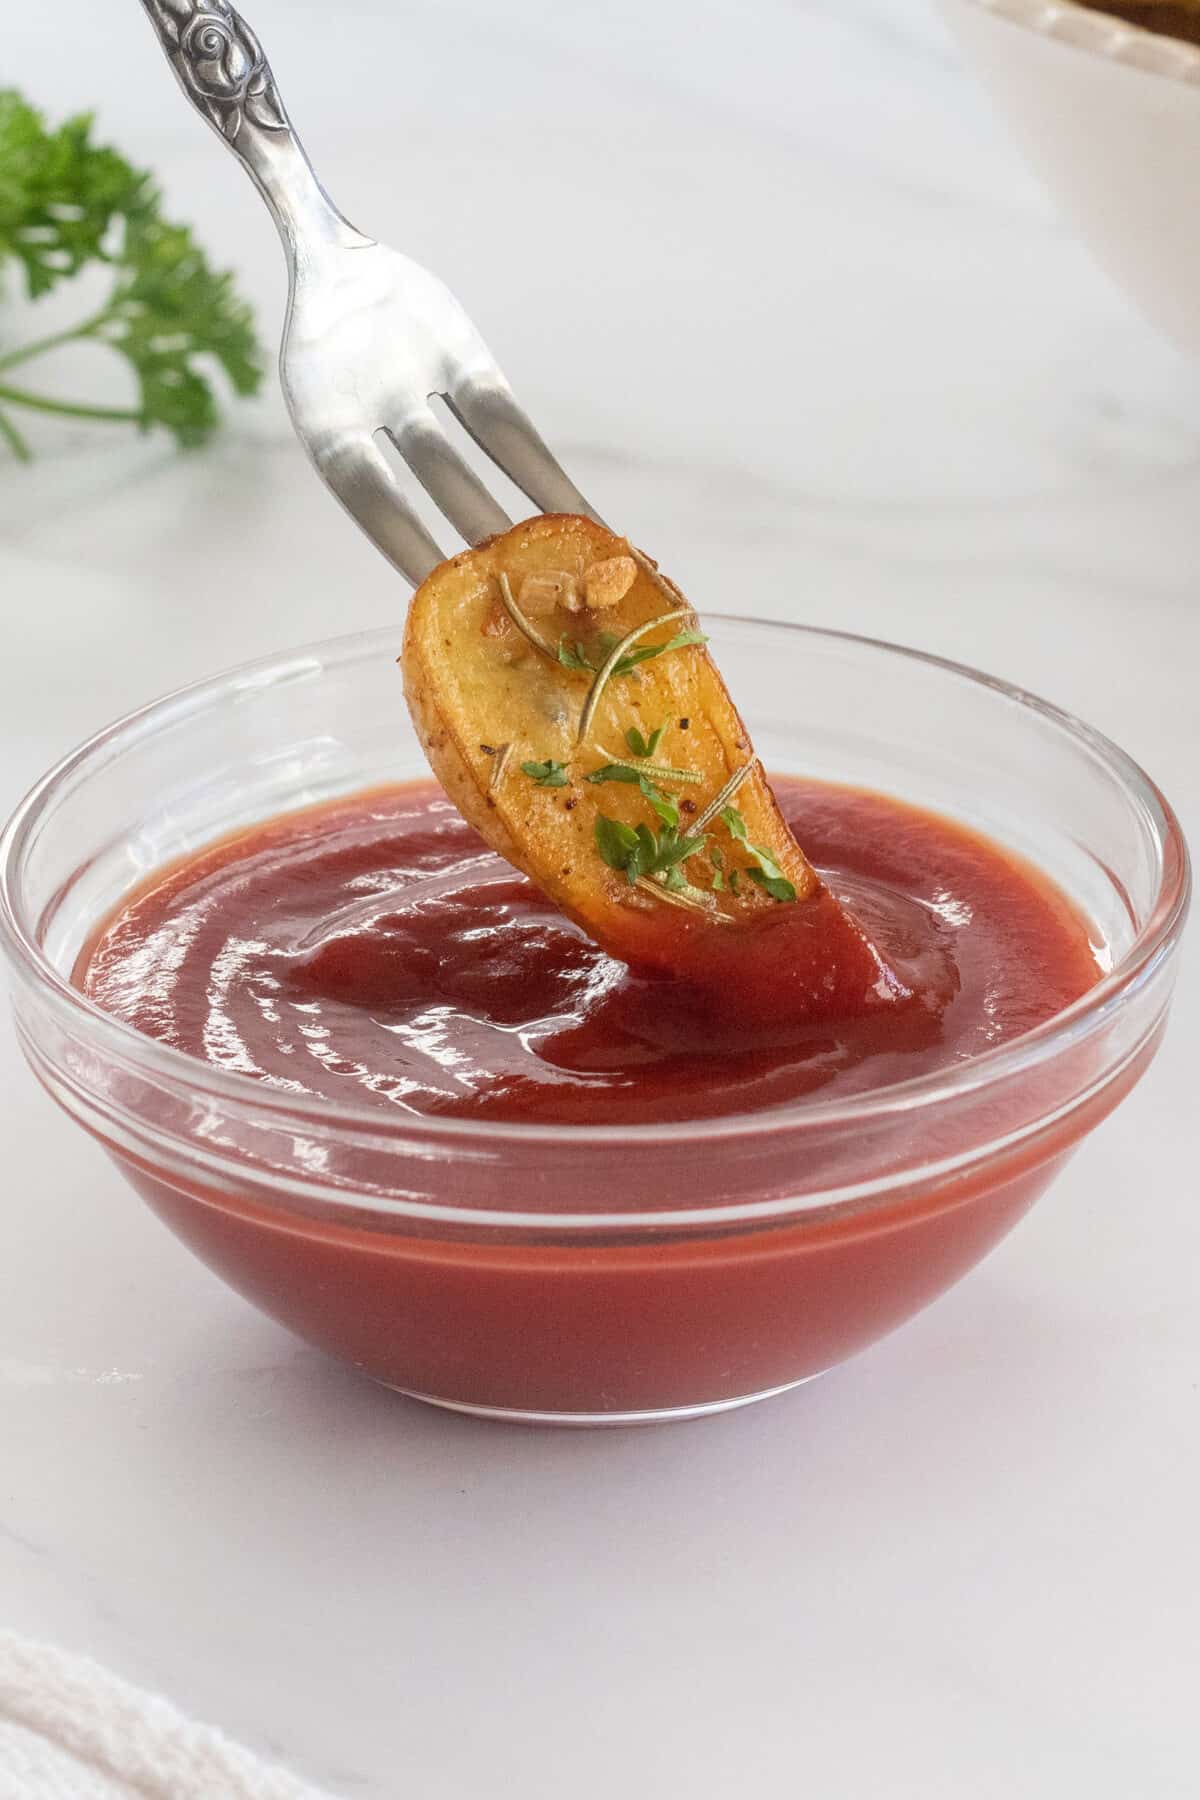 dipping roasted fingerling potatoes in ketchup